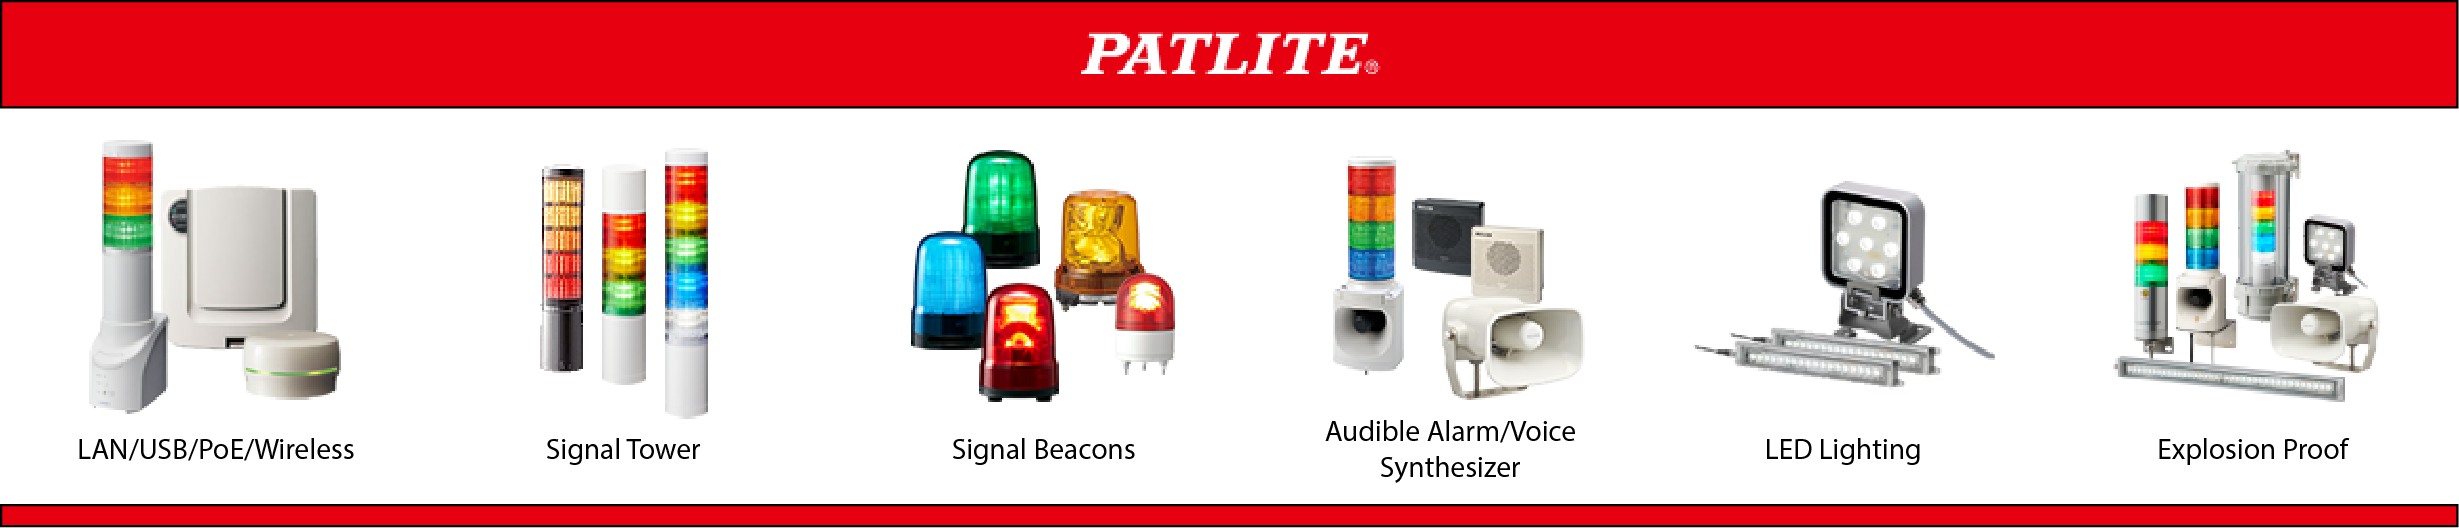 Patlite Signal Towers available from Scott Equipment Company